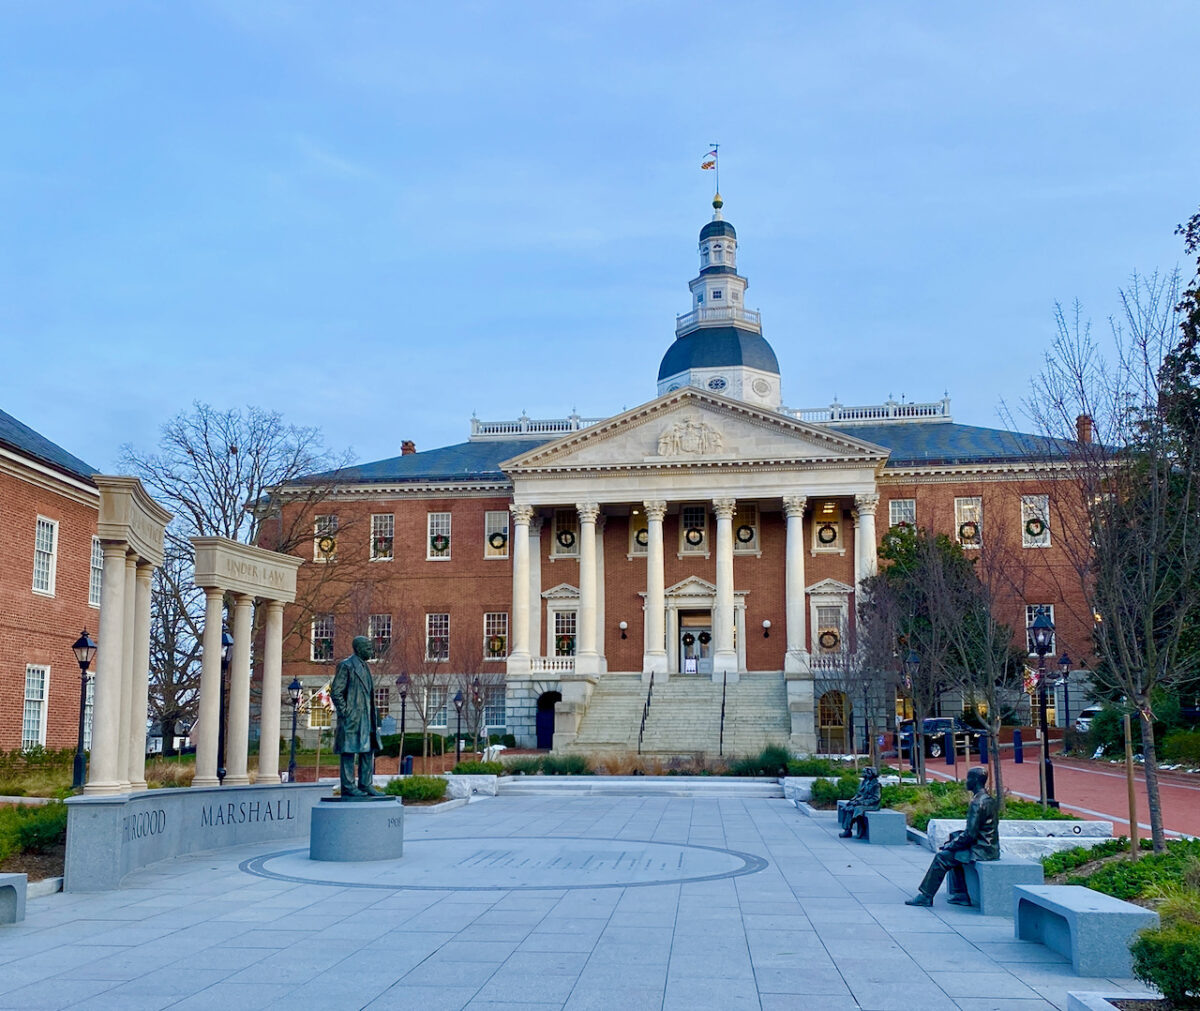 IMG 1235 1200x1011 - Photo Essay: A Day Trip to the Maryland State Capital of Annapolis